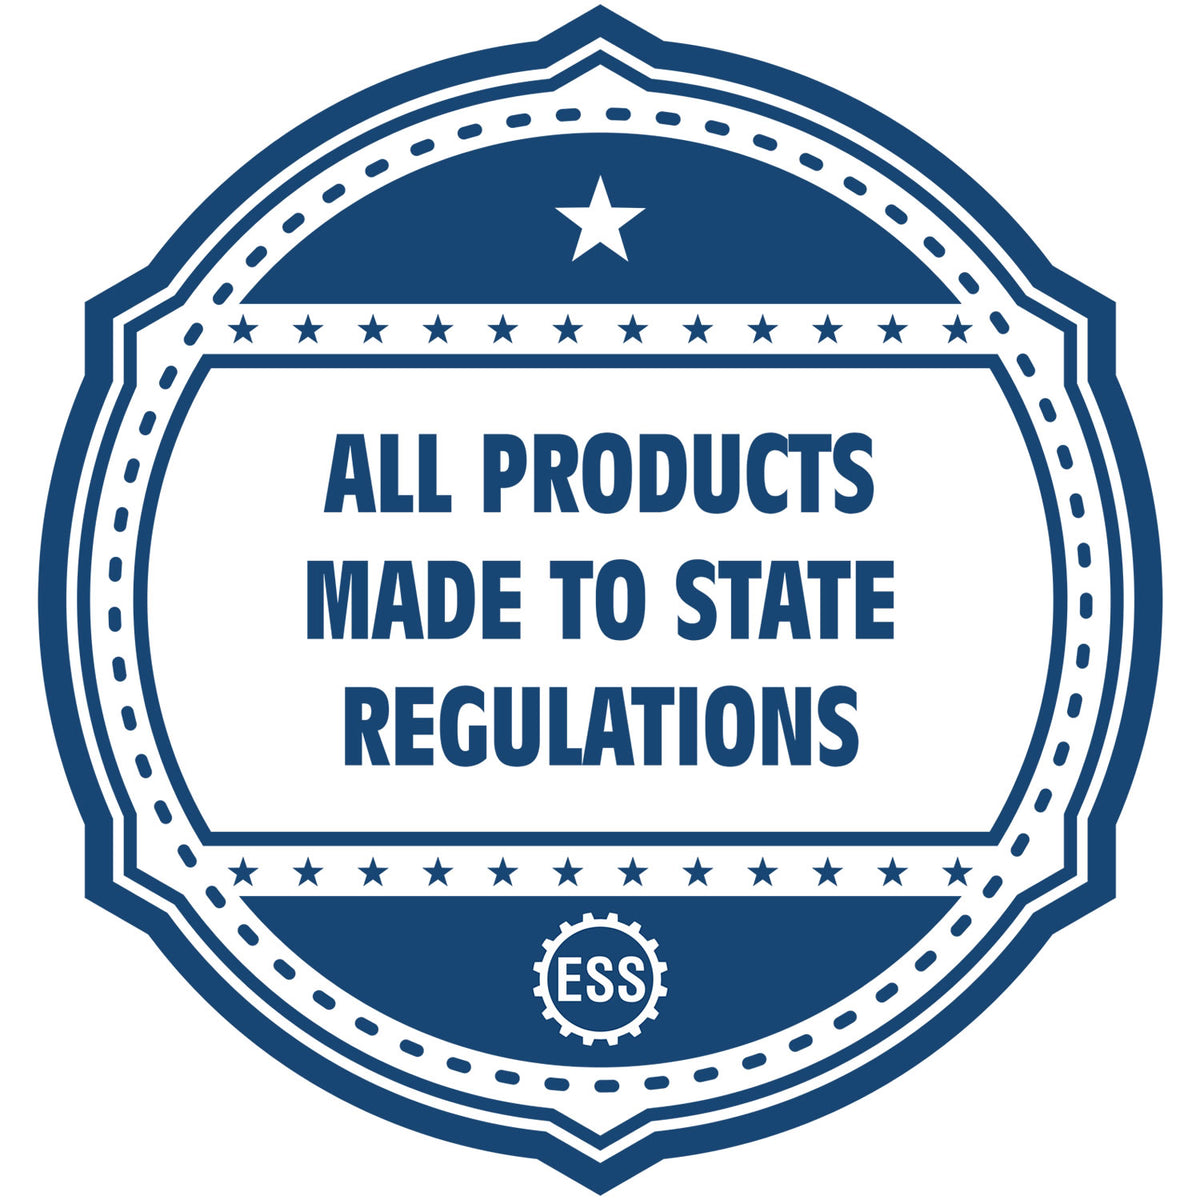 An icon or badge element for the Super Slim Delaware Notary Public Stamp showing that this product is made in compliance with state regulations.